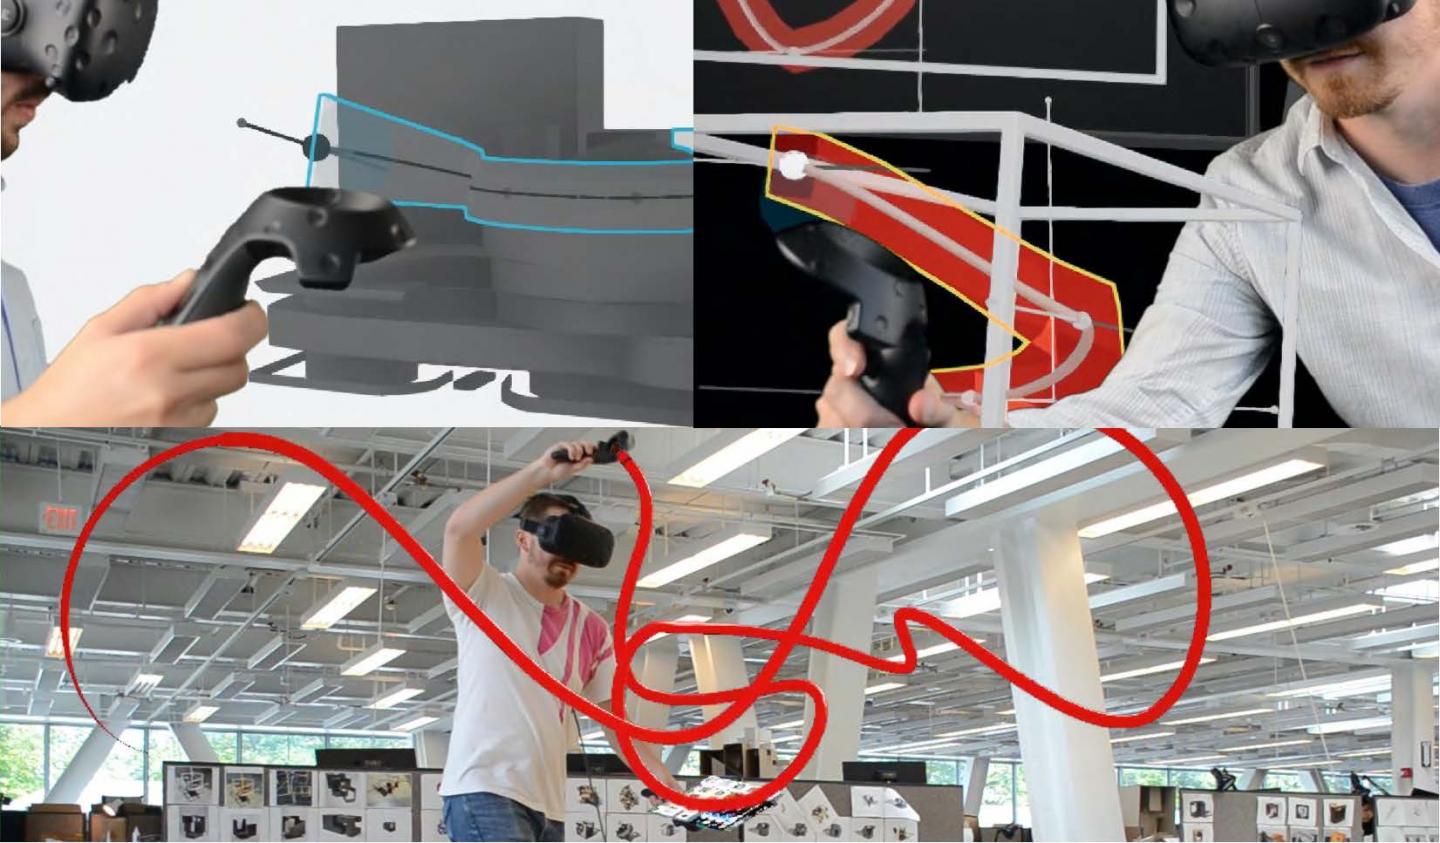 montage of 3 images of a man using 3D goggles and a virtual reality hand-held device